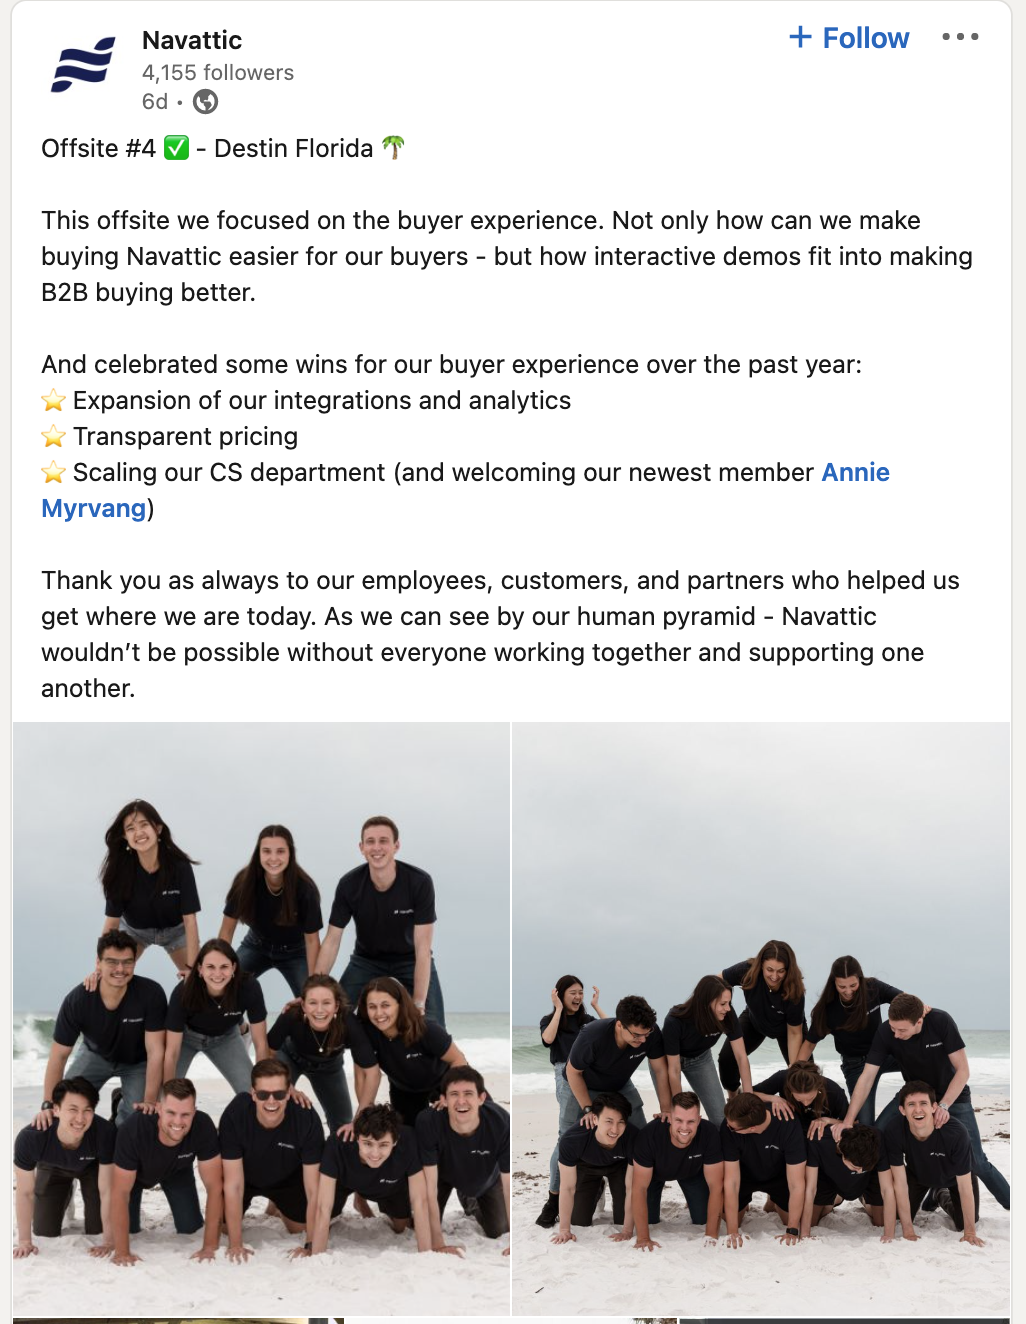 A LinkedIn post from Navattic showing their team in a human pyramid